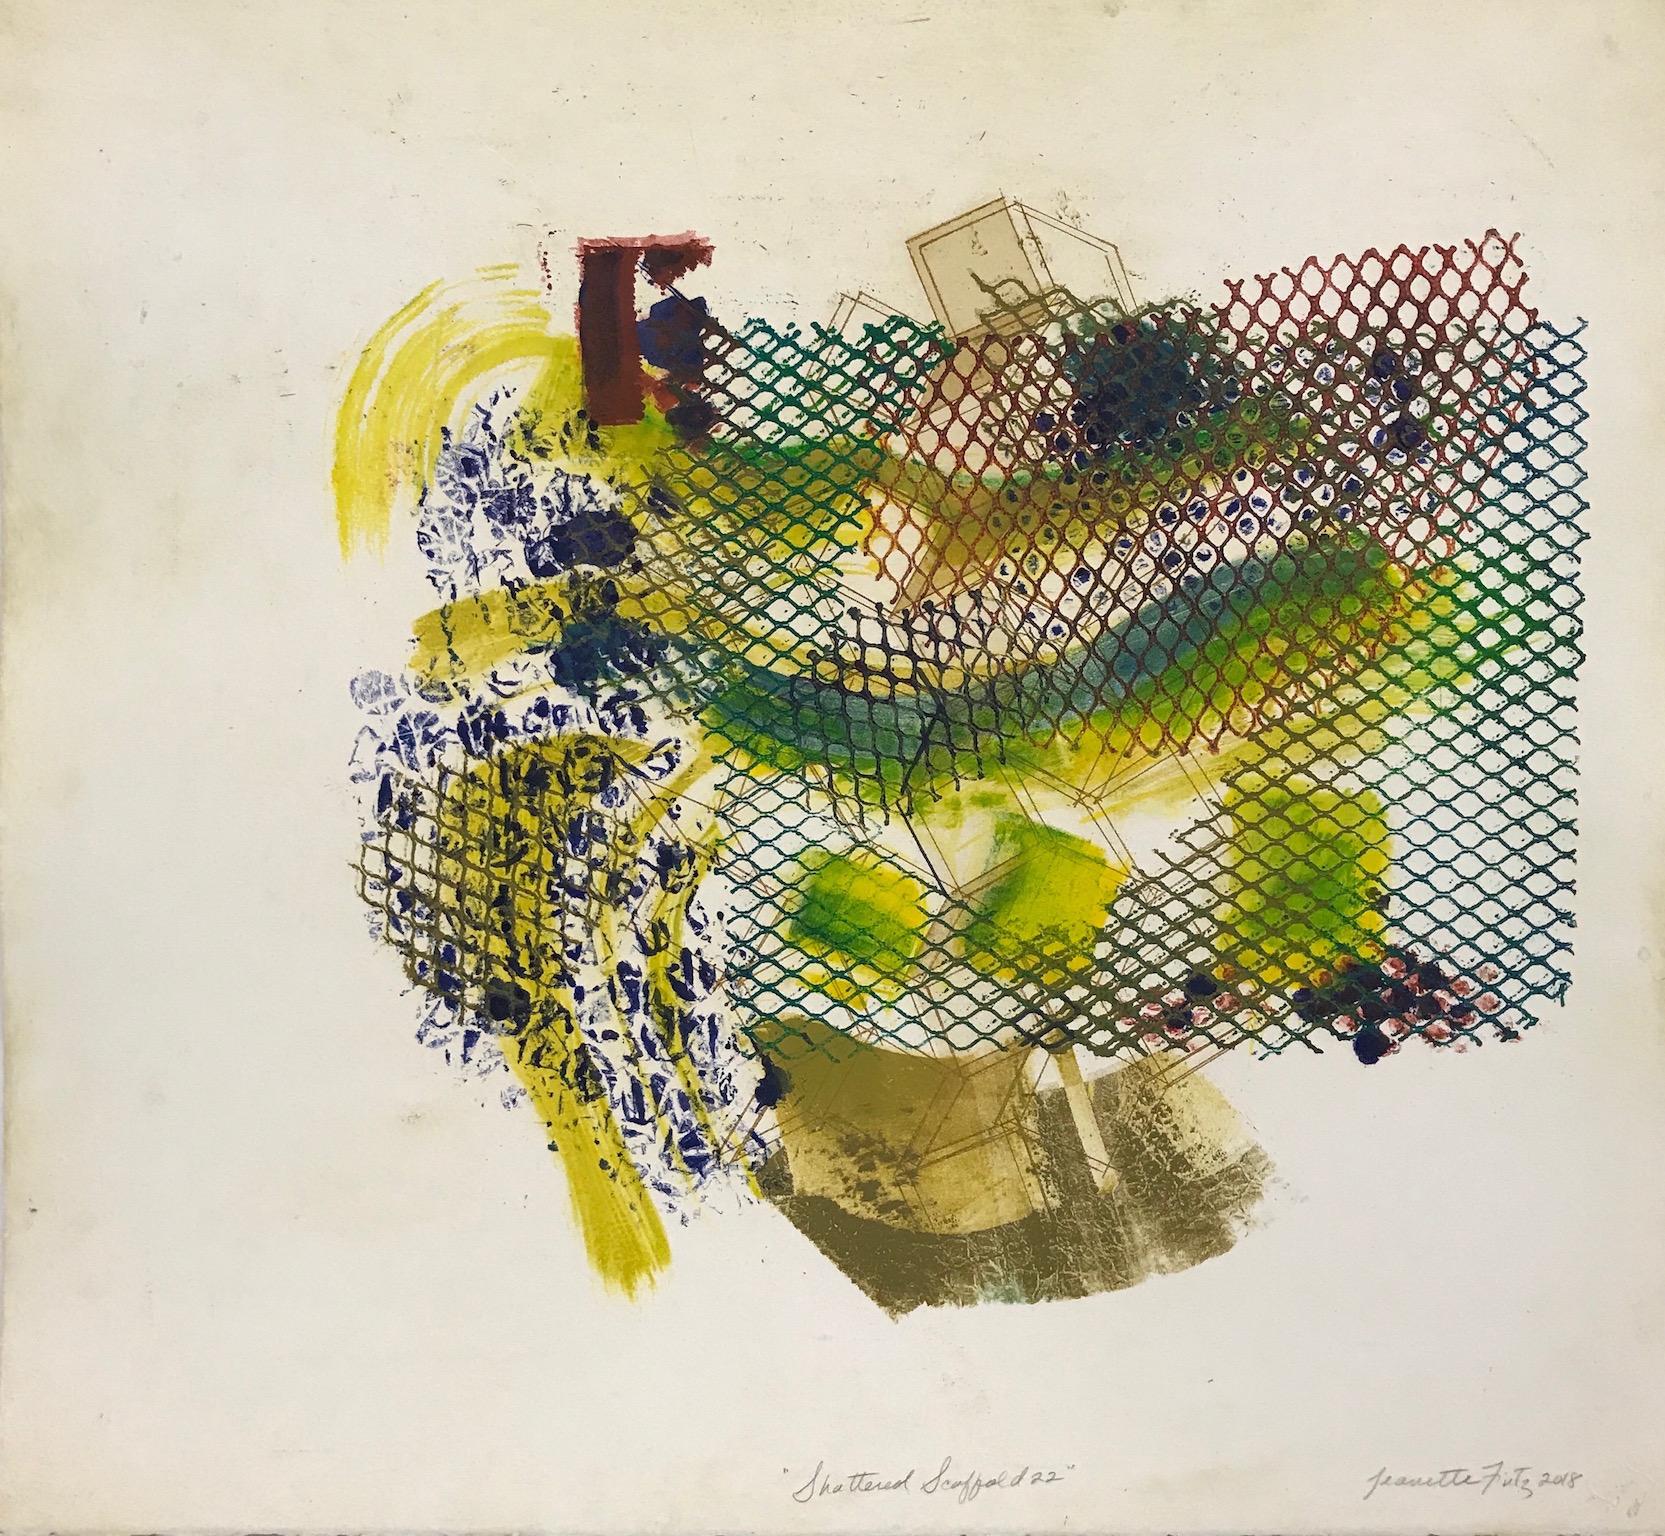 Jeanette Fintz Abstract Print - "Shattered Scaffold 22", gestural abstract monoprint, green, blues, yellow.